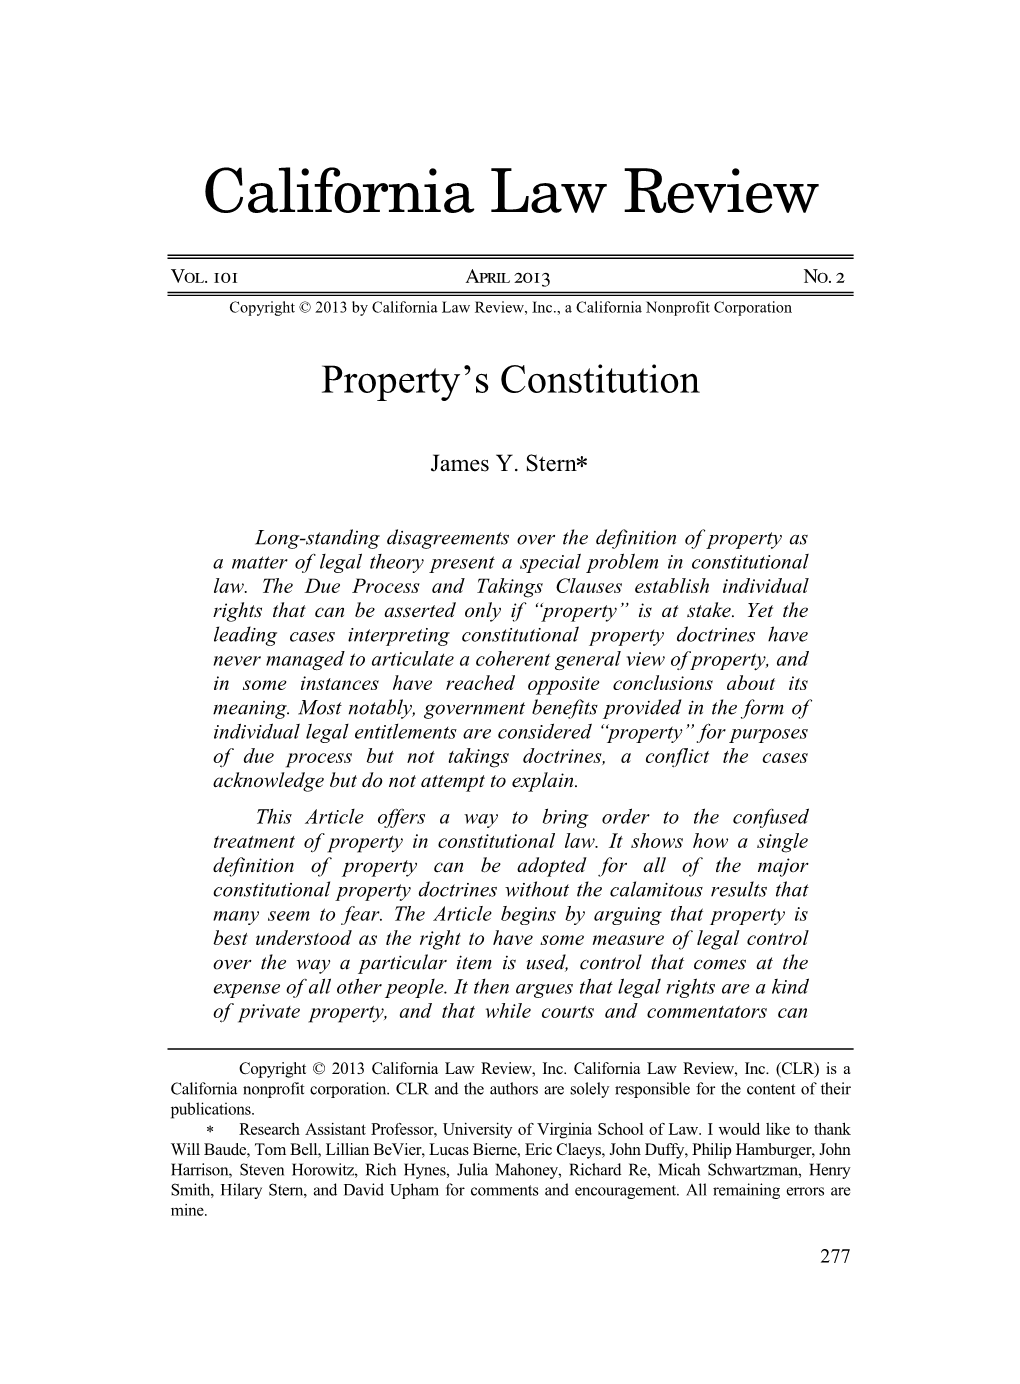 Property's Constitution